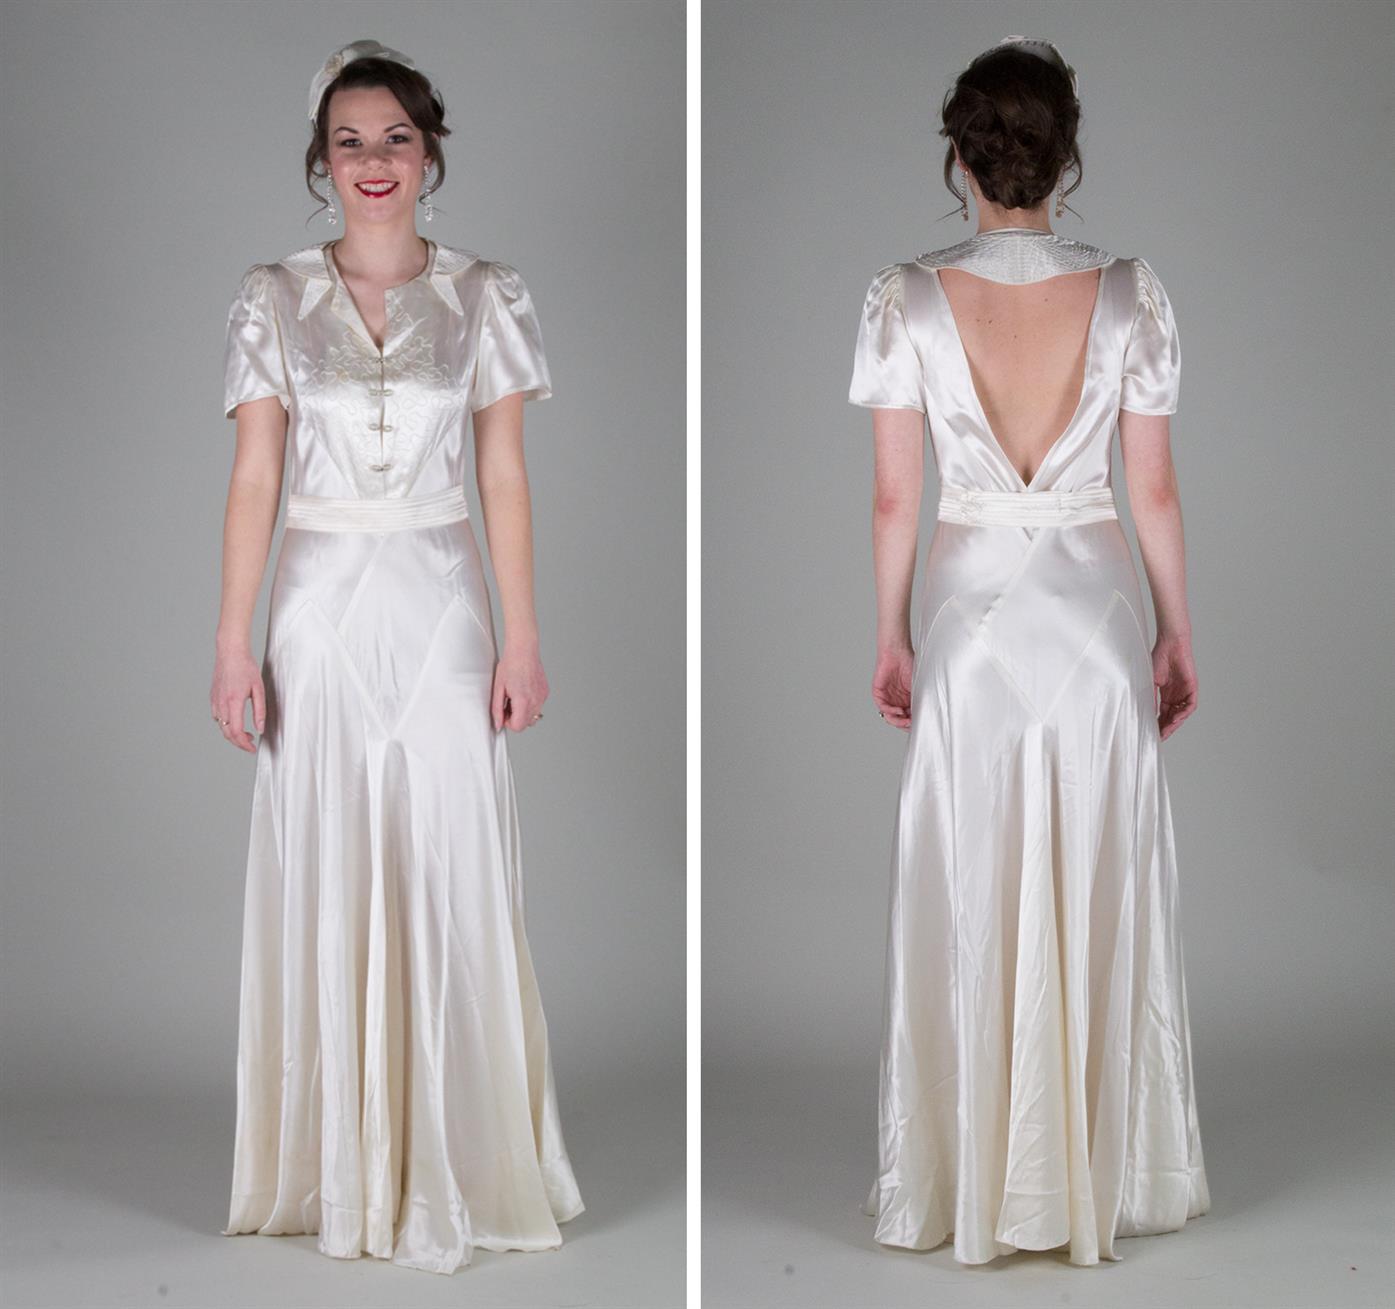 Dreamy Vintage Wedding Dresses from Authentic Vintage ...